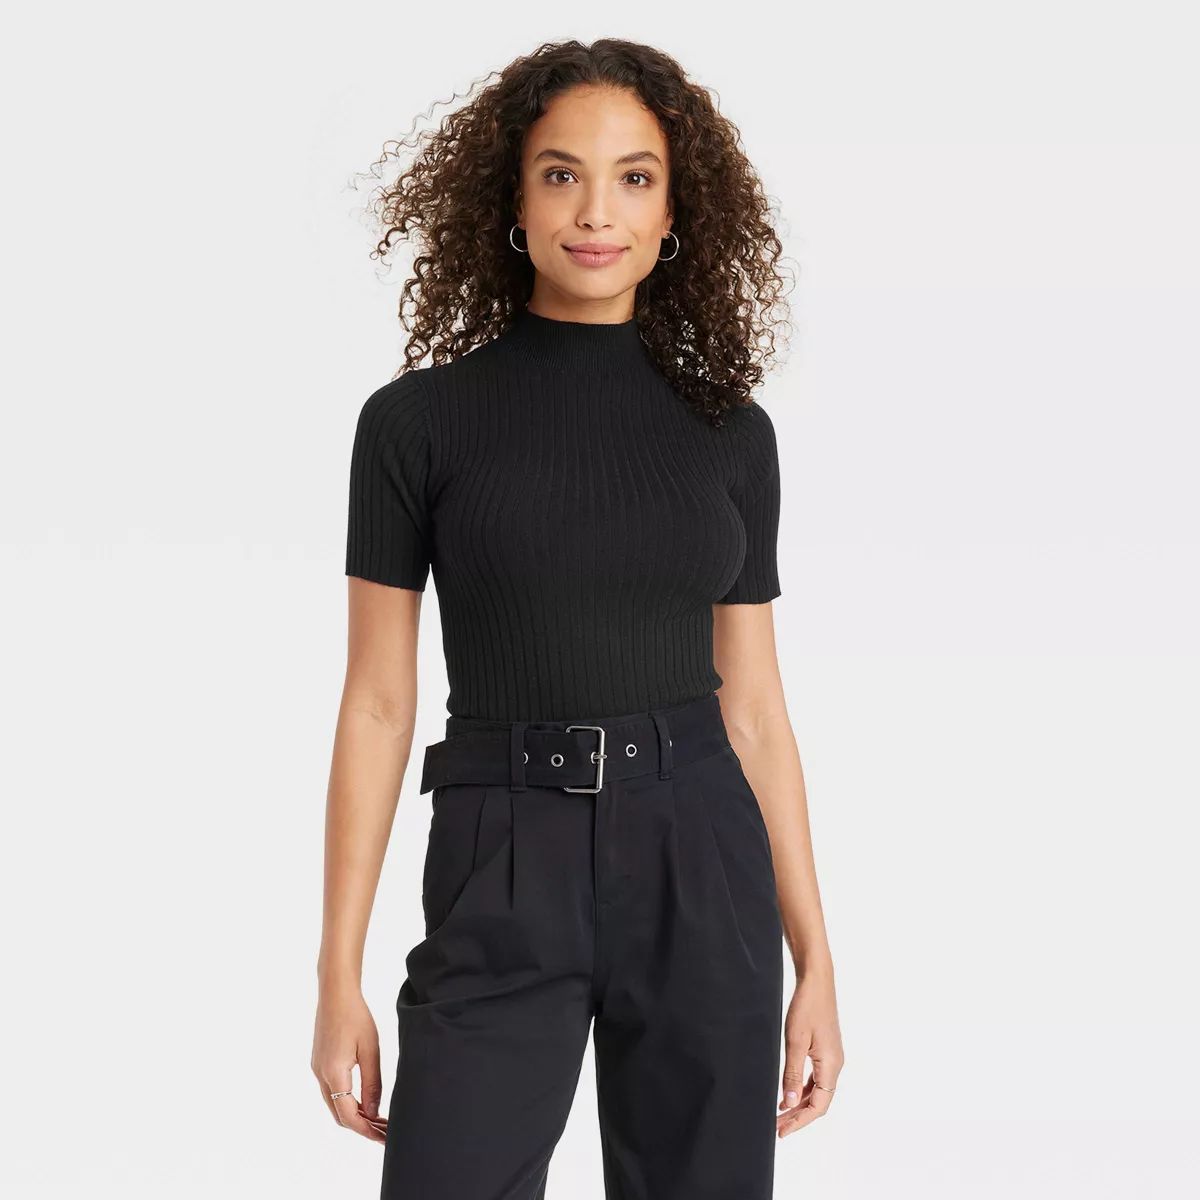 Women's Mock Turtleneck Ribbed Sweater - A New Day™ | Target